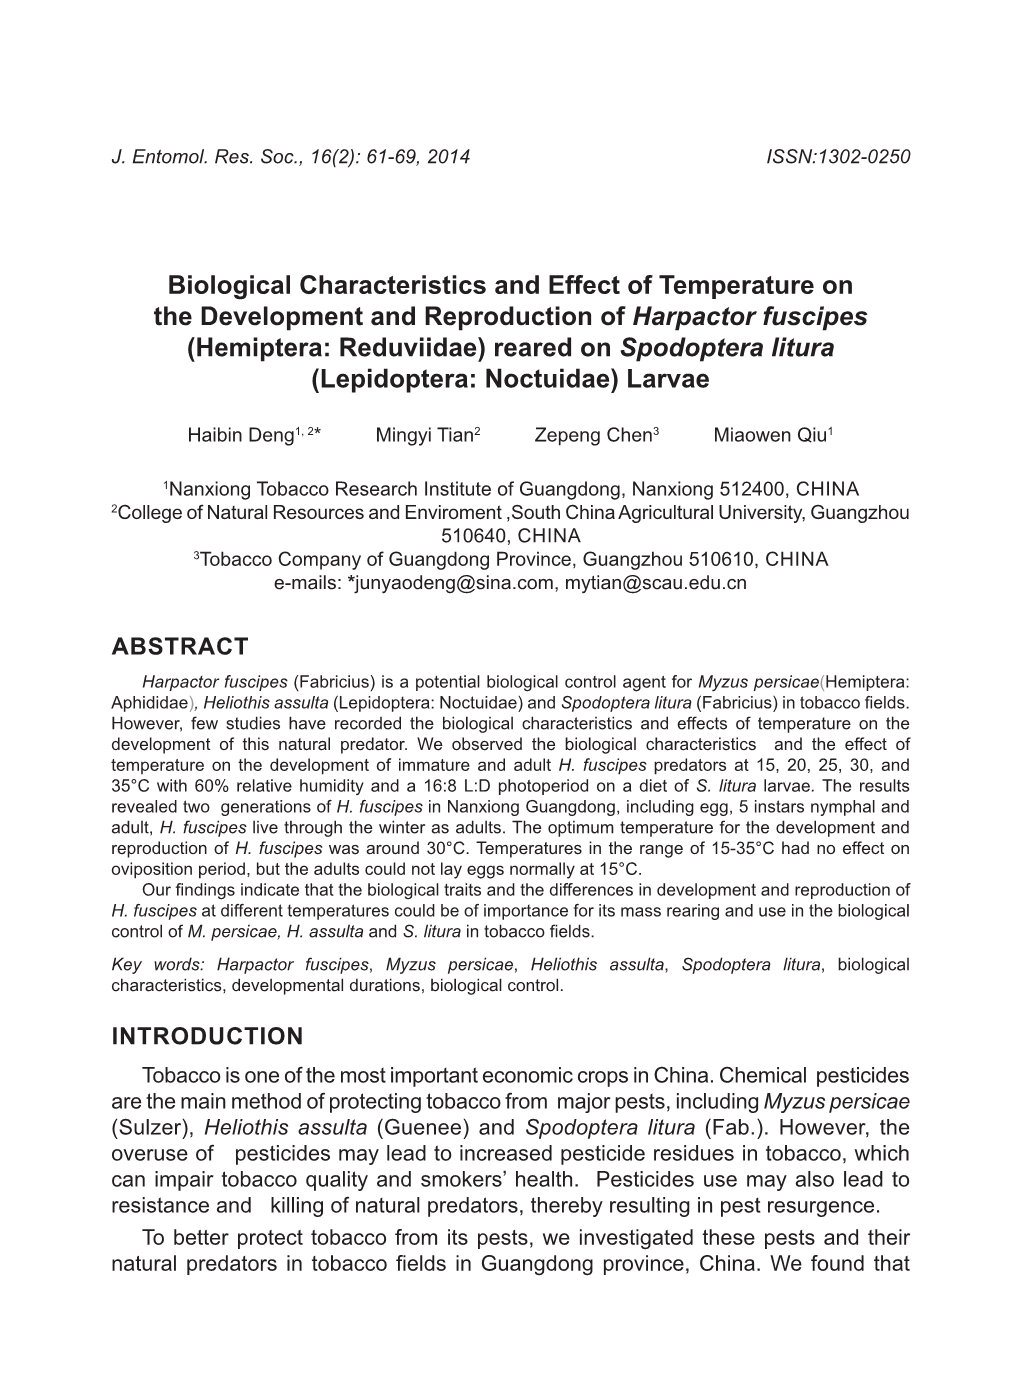 Biological Characteristics and Effect of Temperature on the Development